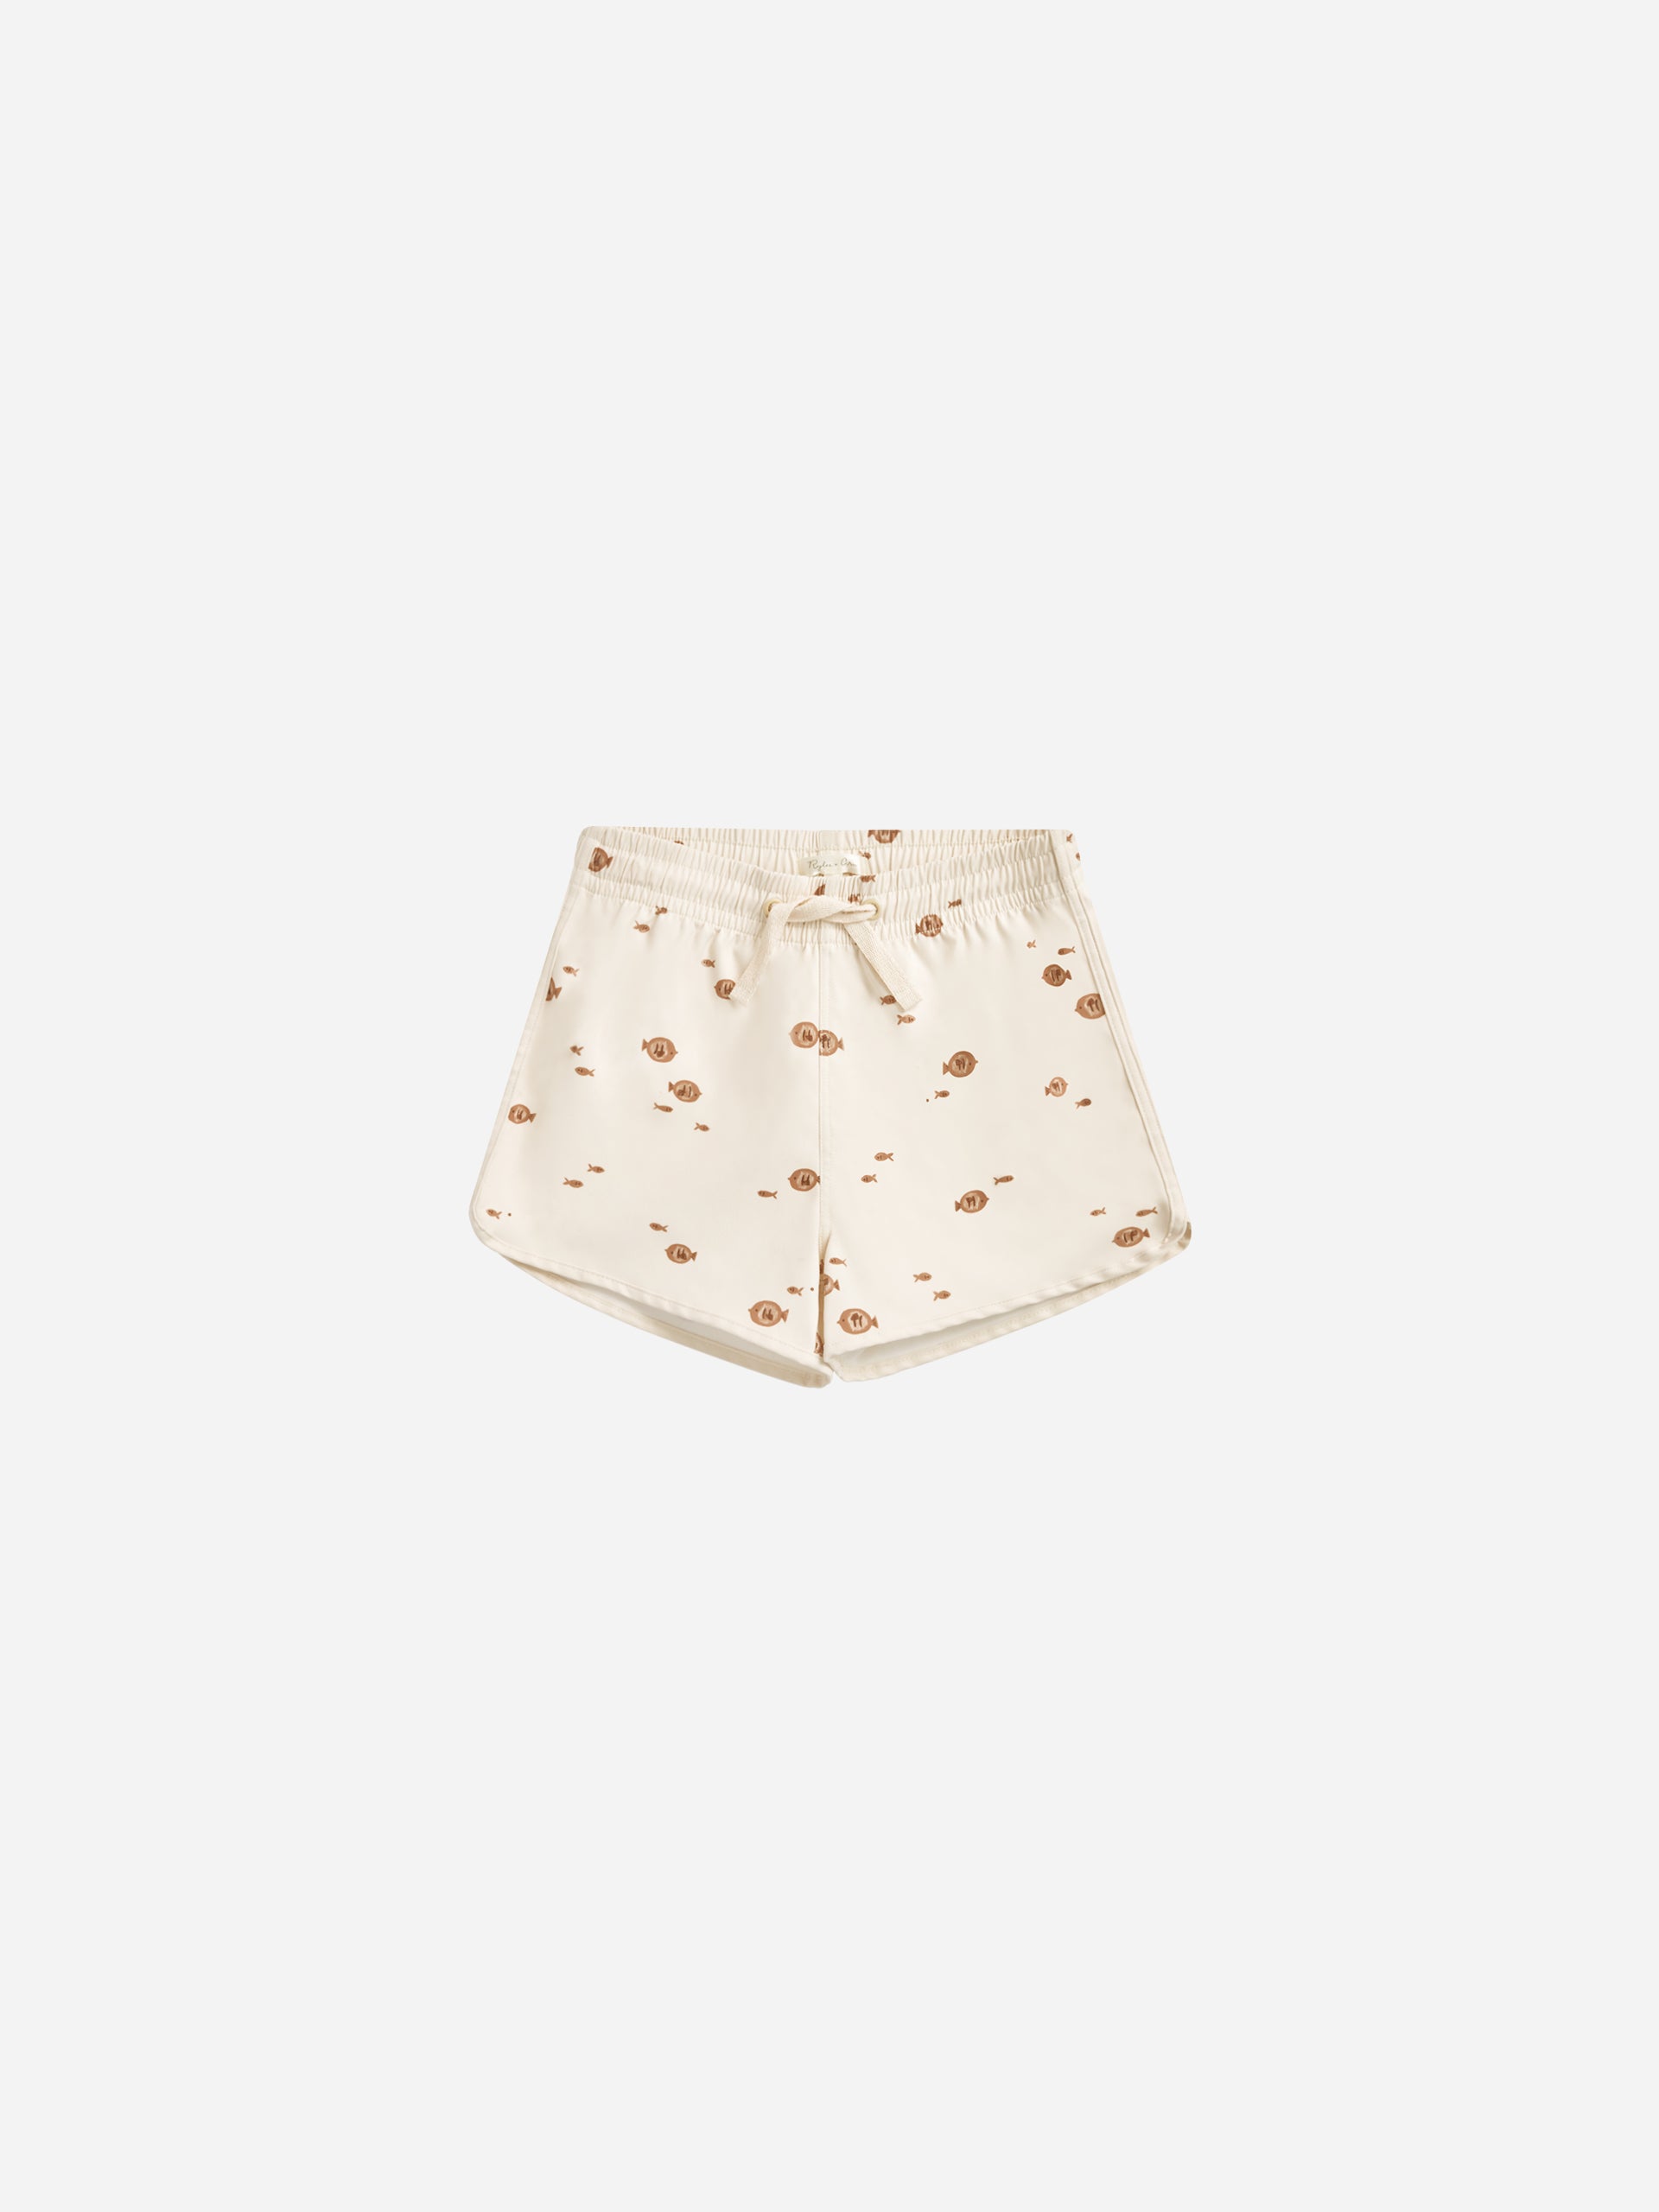 Swim Trunk || Fish - Rylee + Cru | Kids Clothes | Trendy Baby Clothes | Modern Infant Outfits |